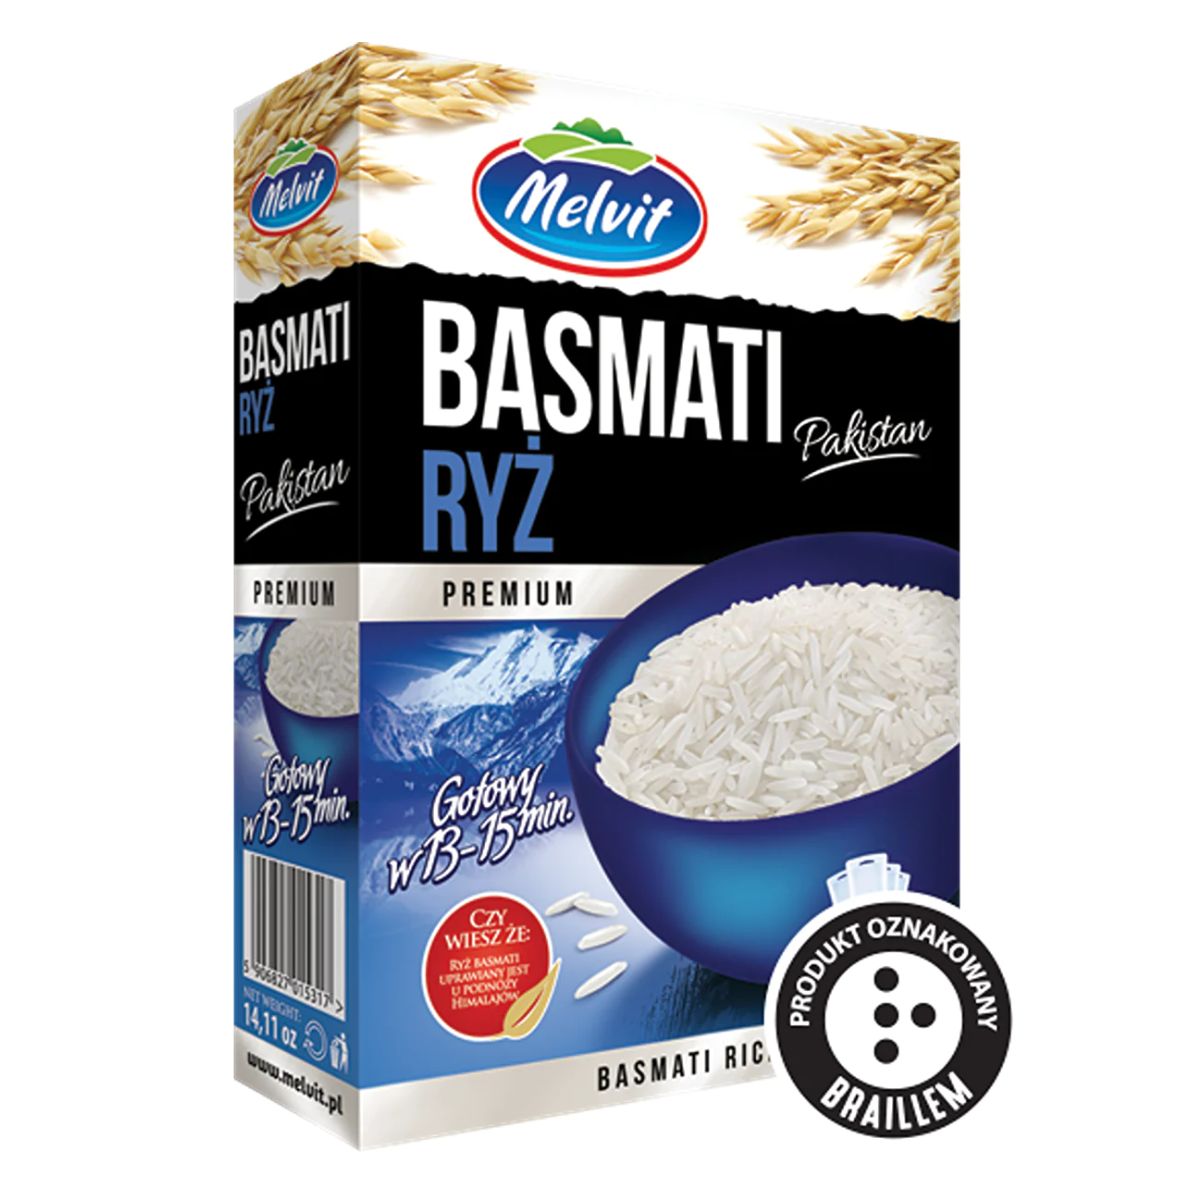 Package of Melvit - Basmati Rice - 100g from Pakistan indicating a premium quality product.